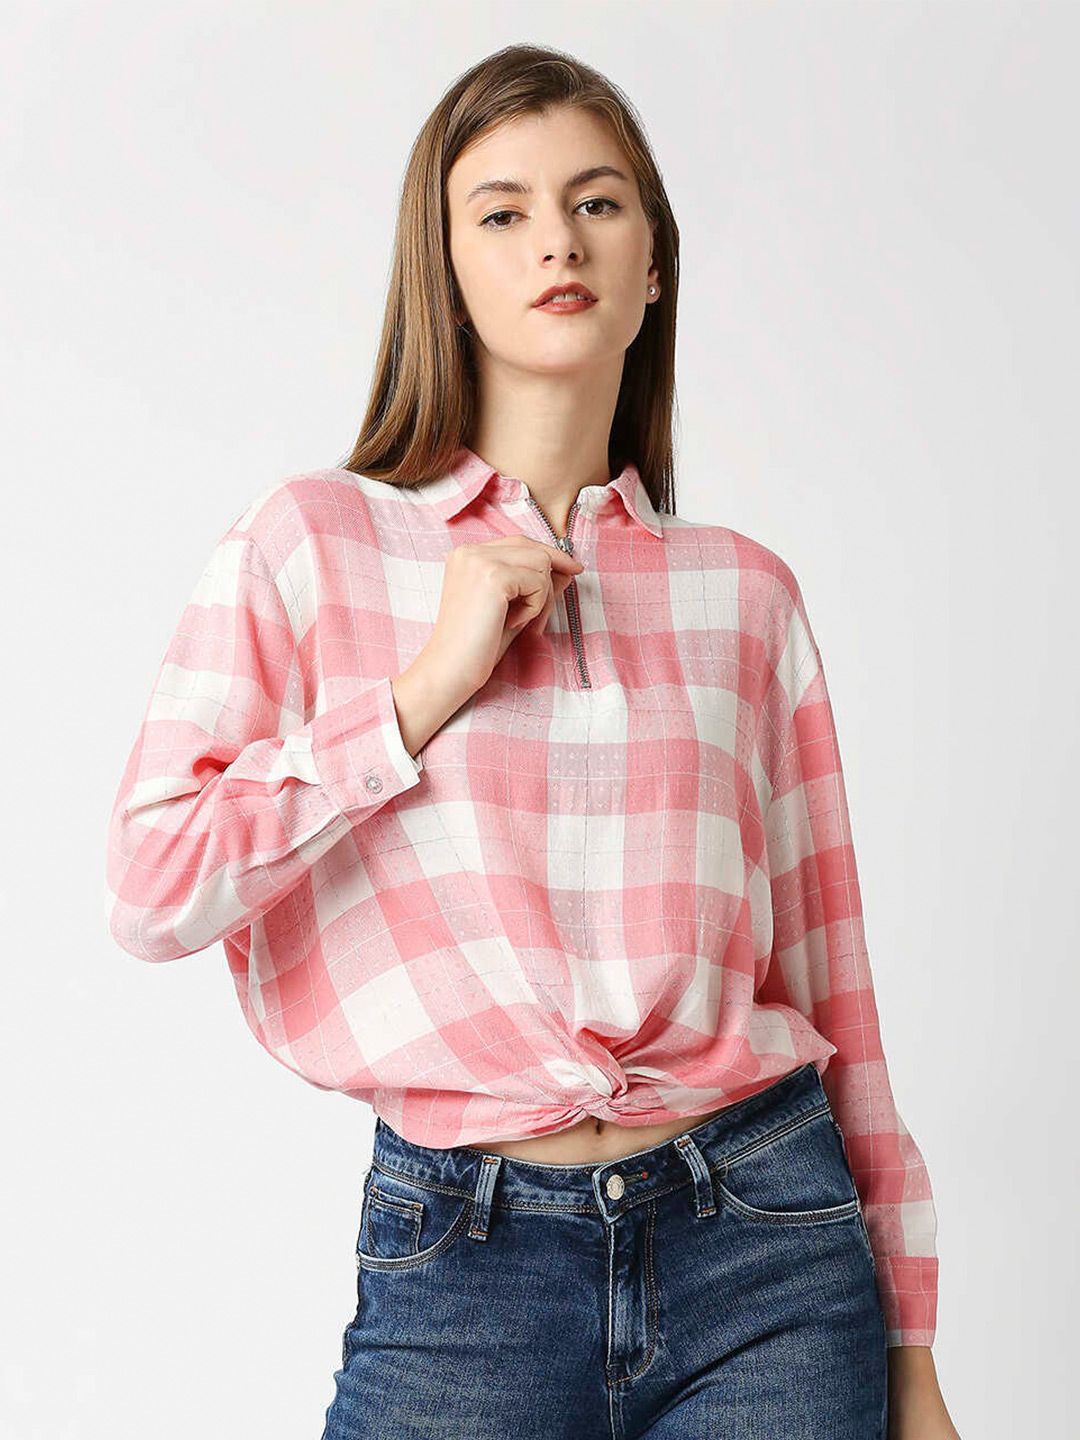 Pepe Jeans Women Pink Checked Shirt Style Top Price in India